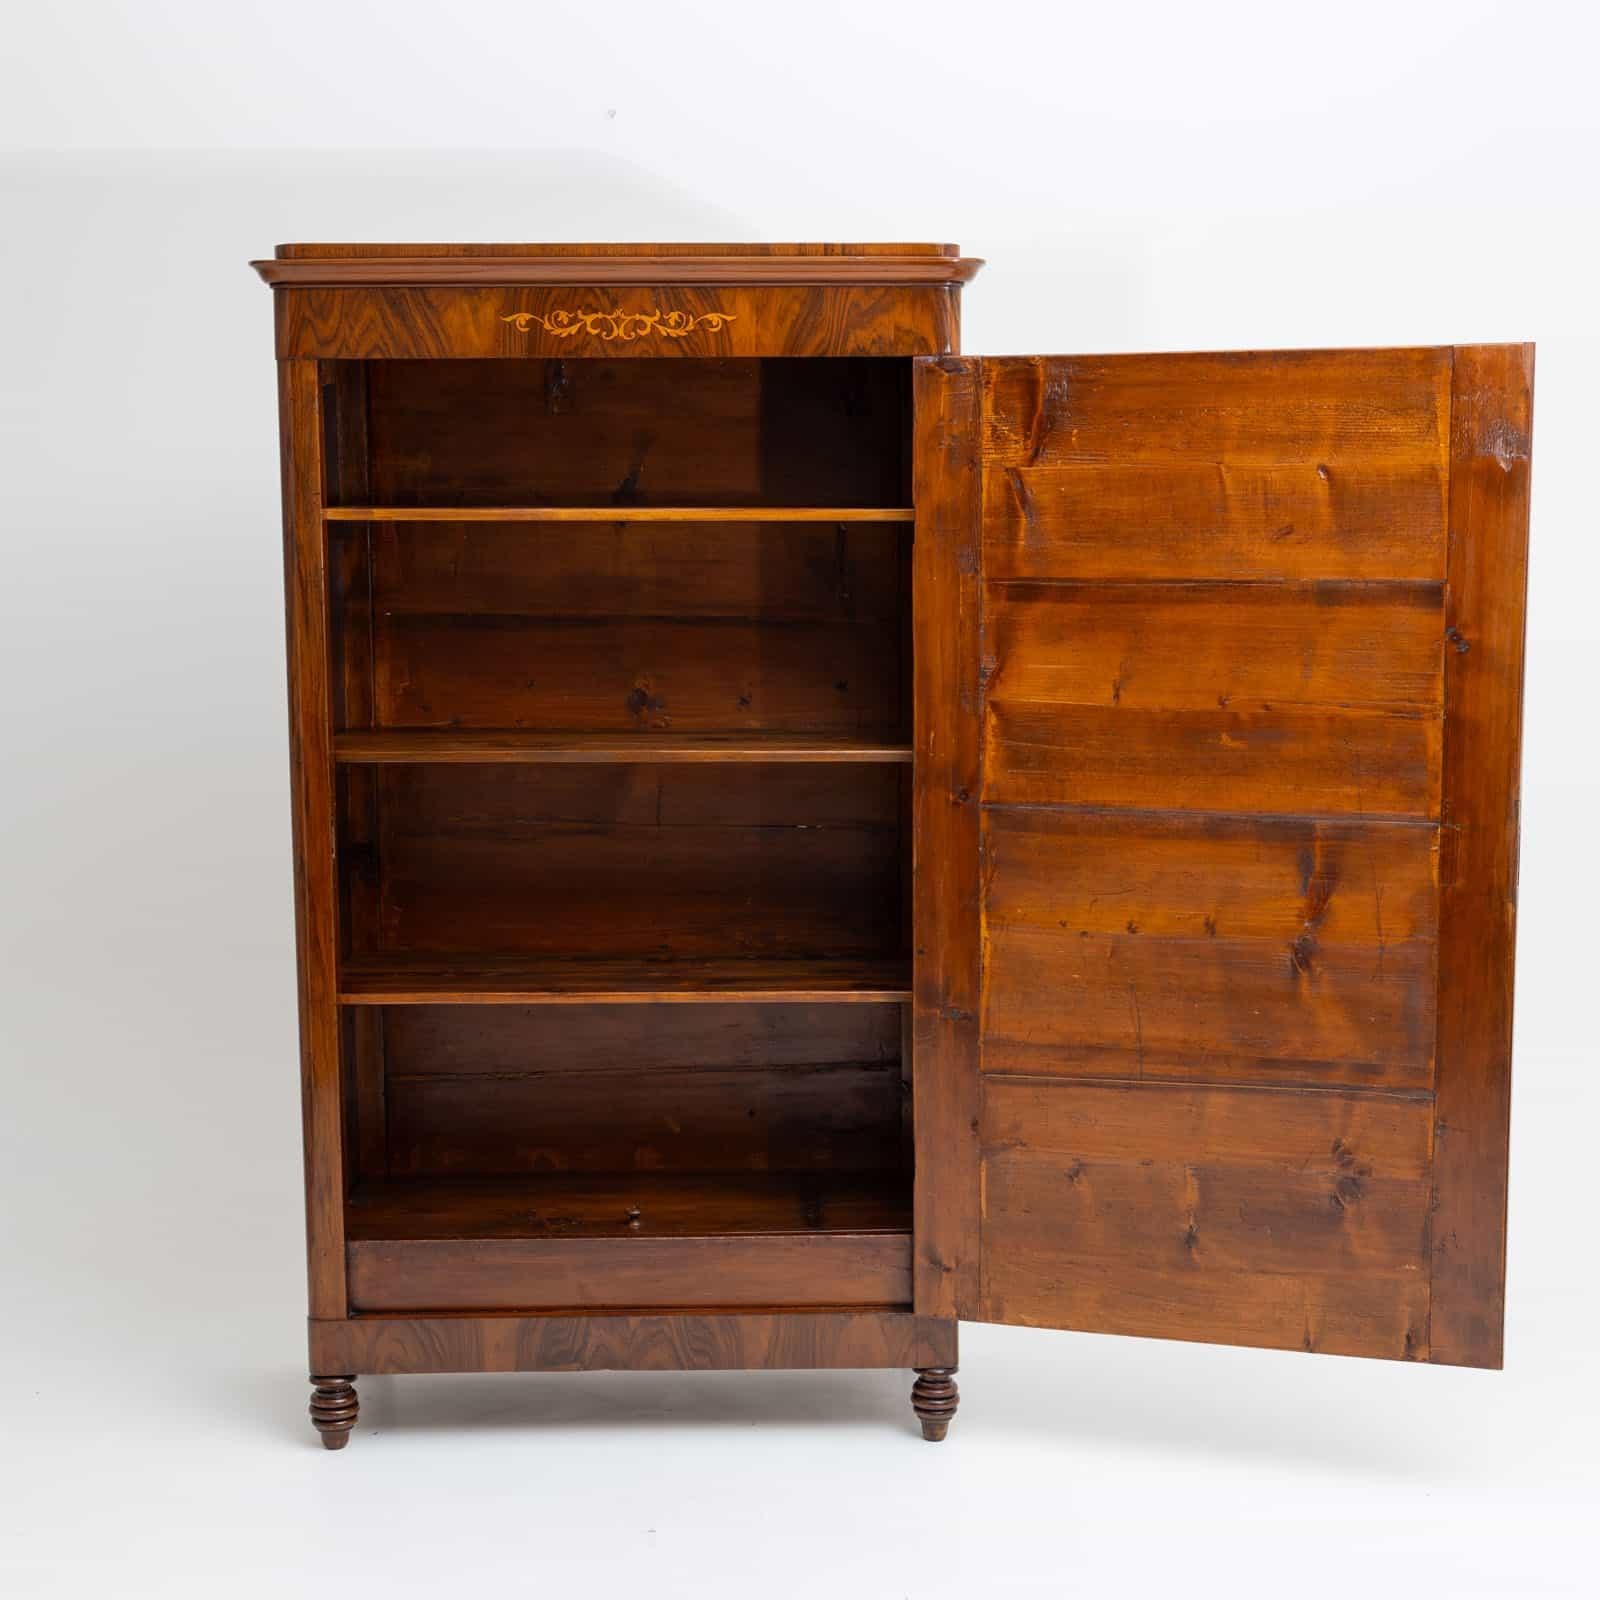 Austrian Linen Cabinet with one door, polished walnut with inlays, Mid-19th Century For Sale